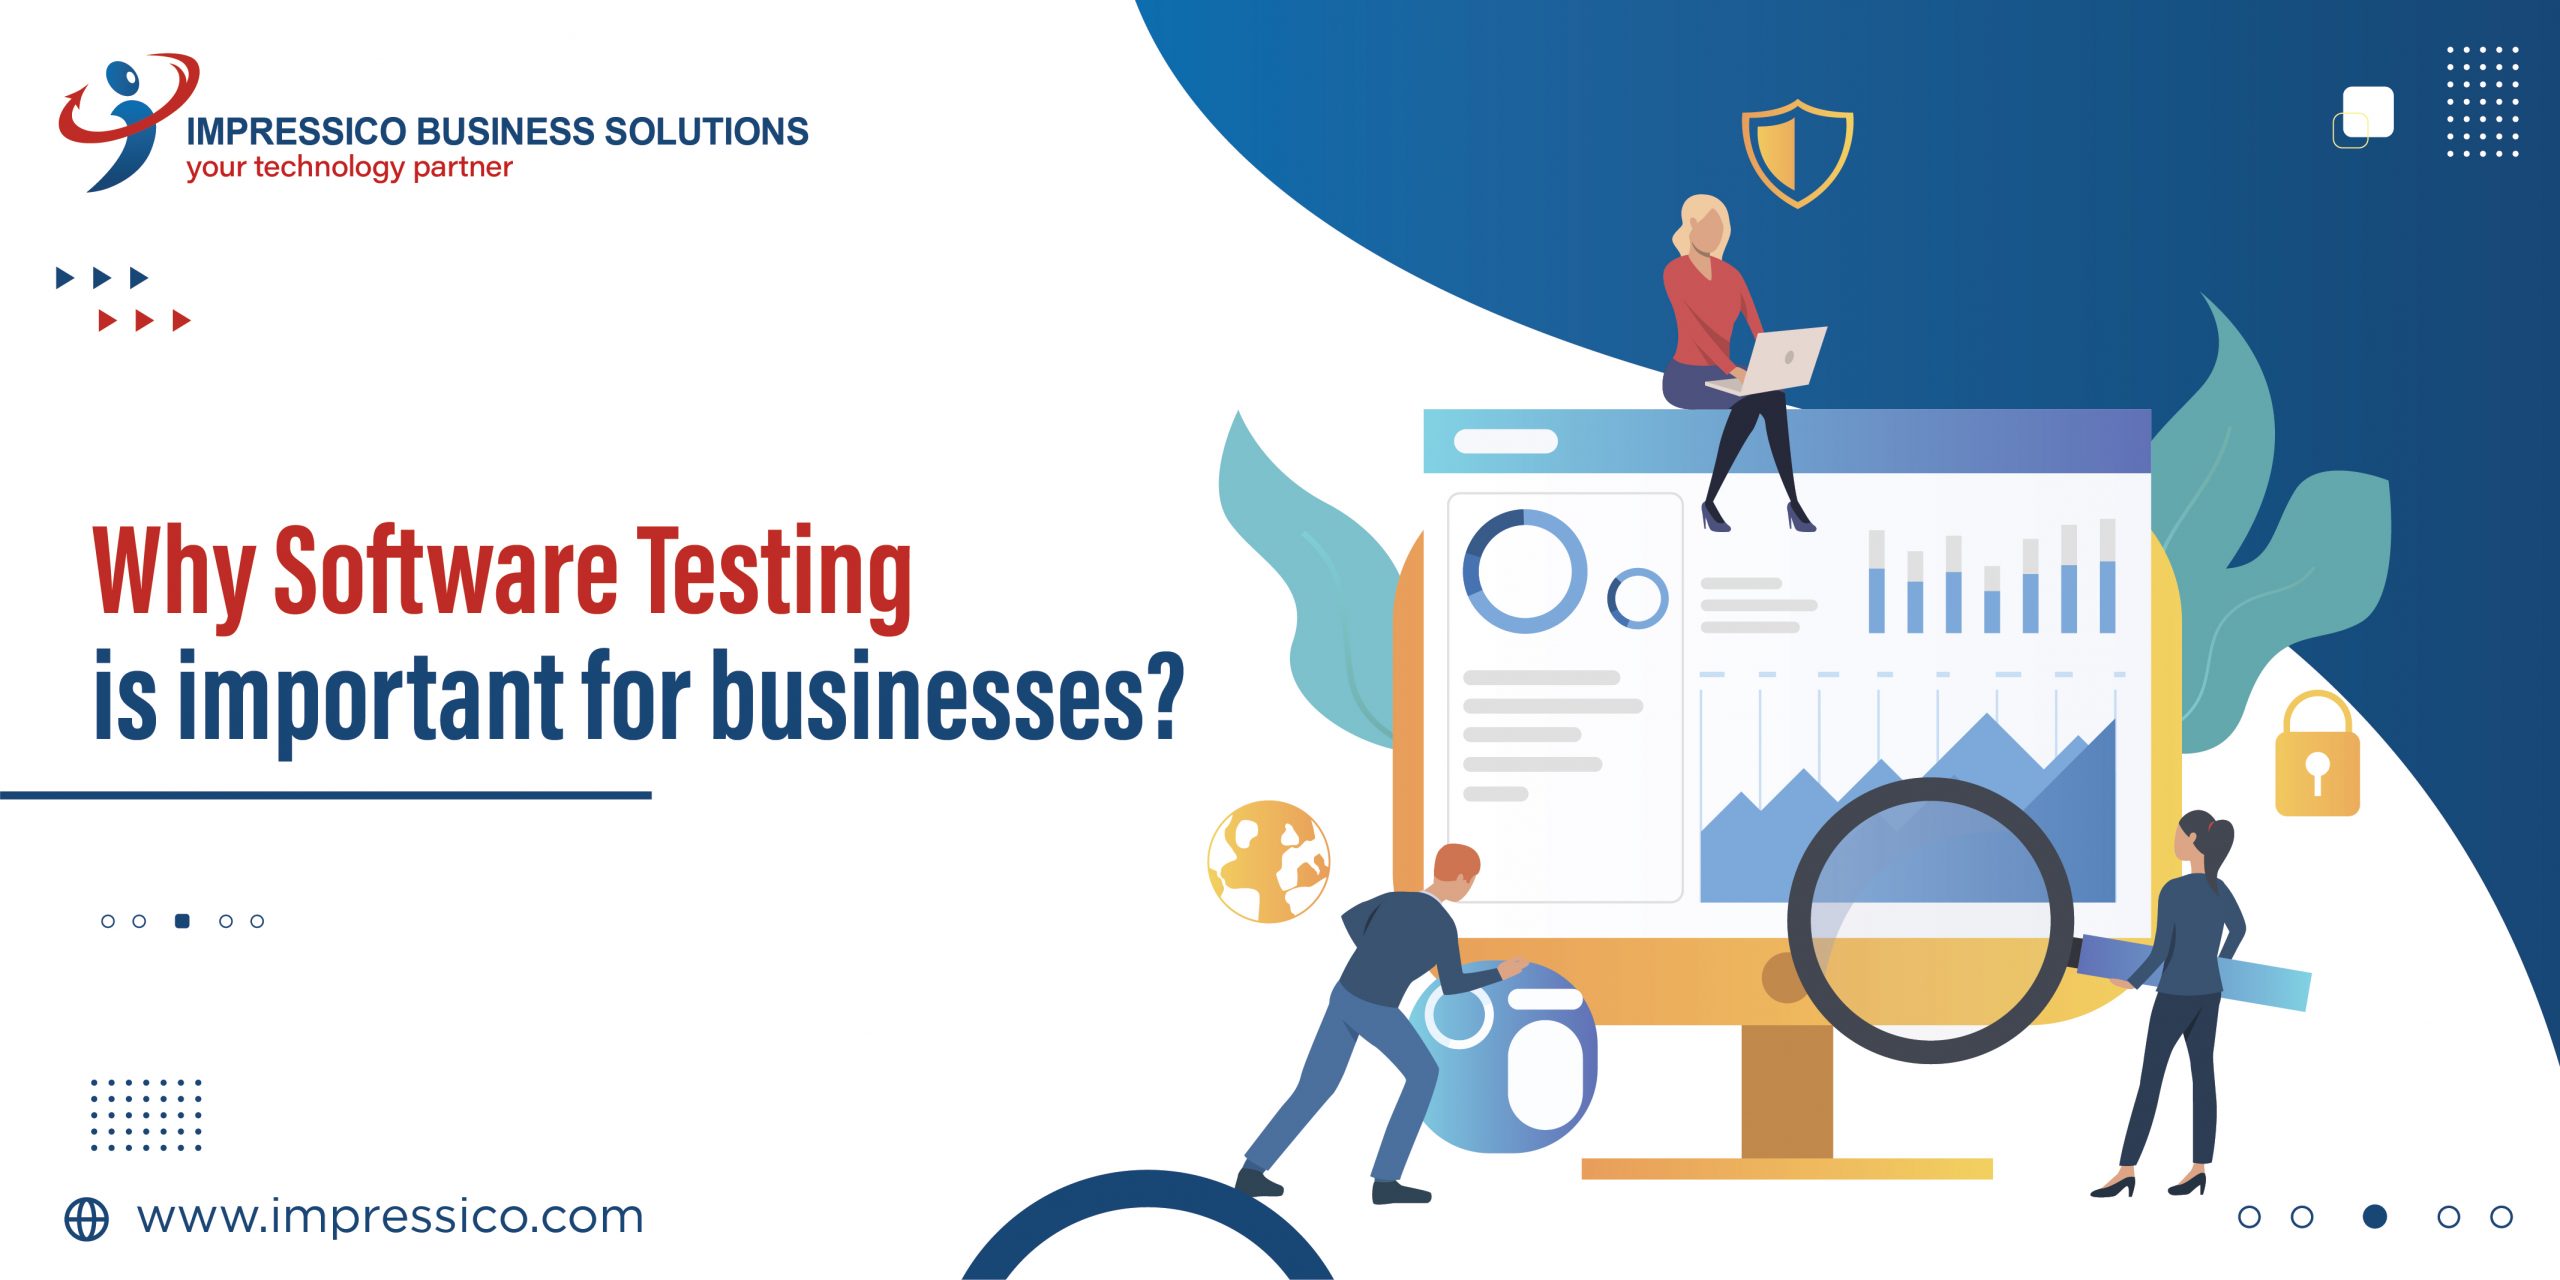 Advantages of software testing